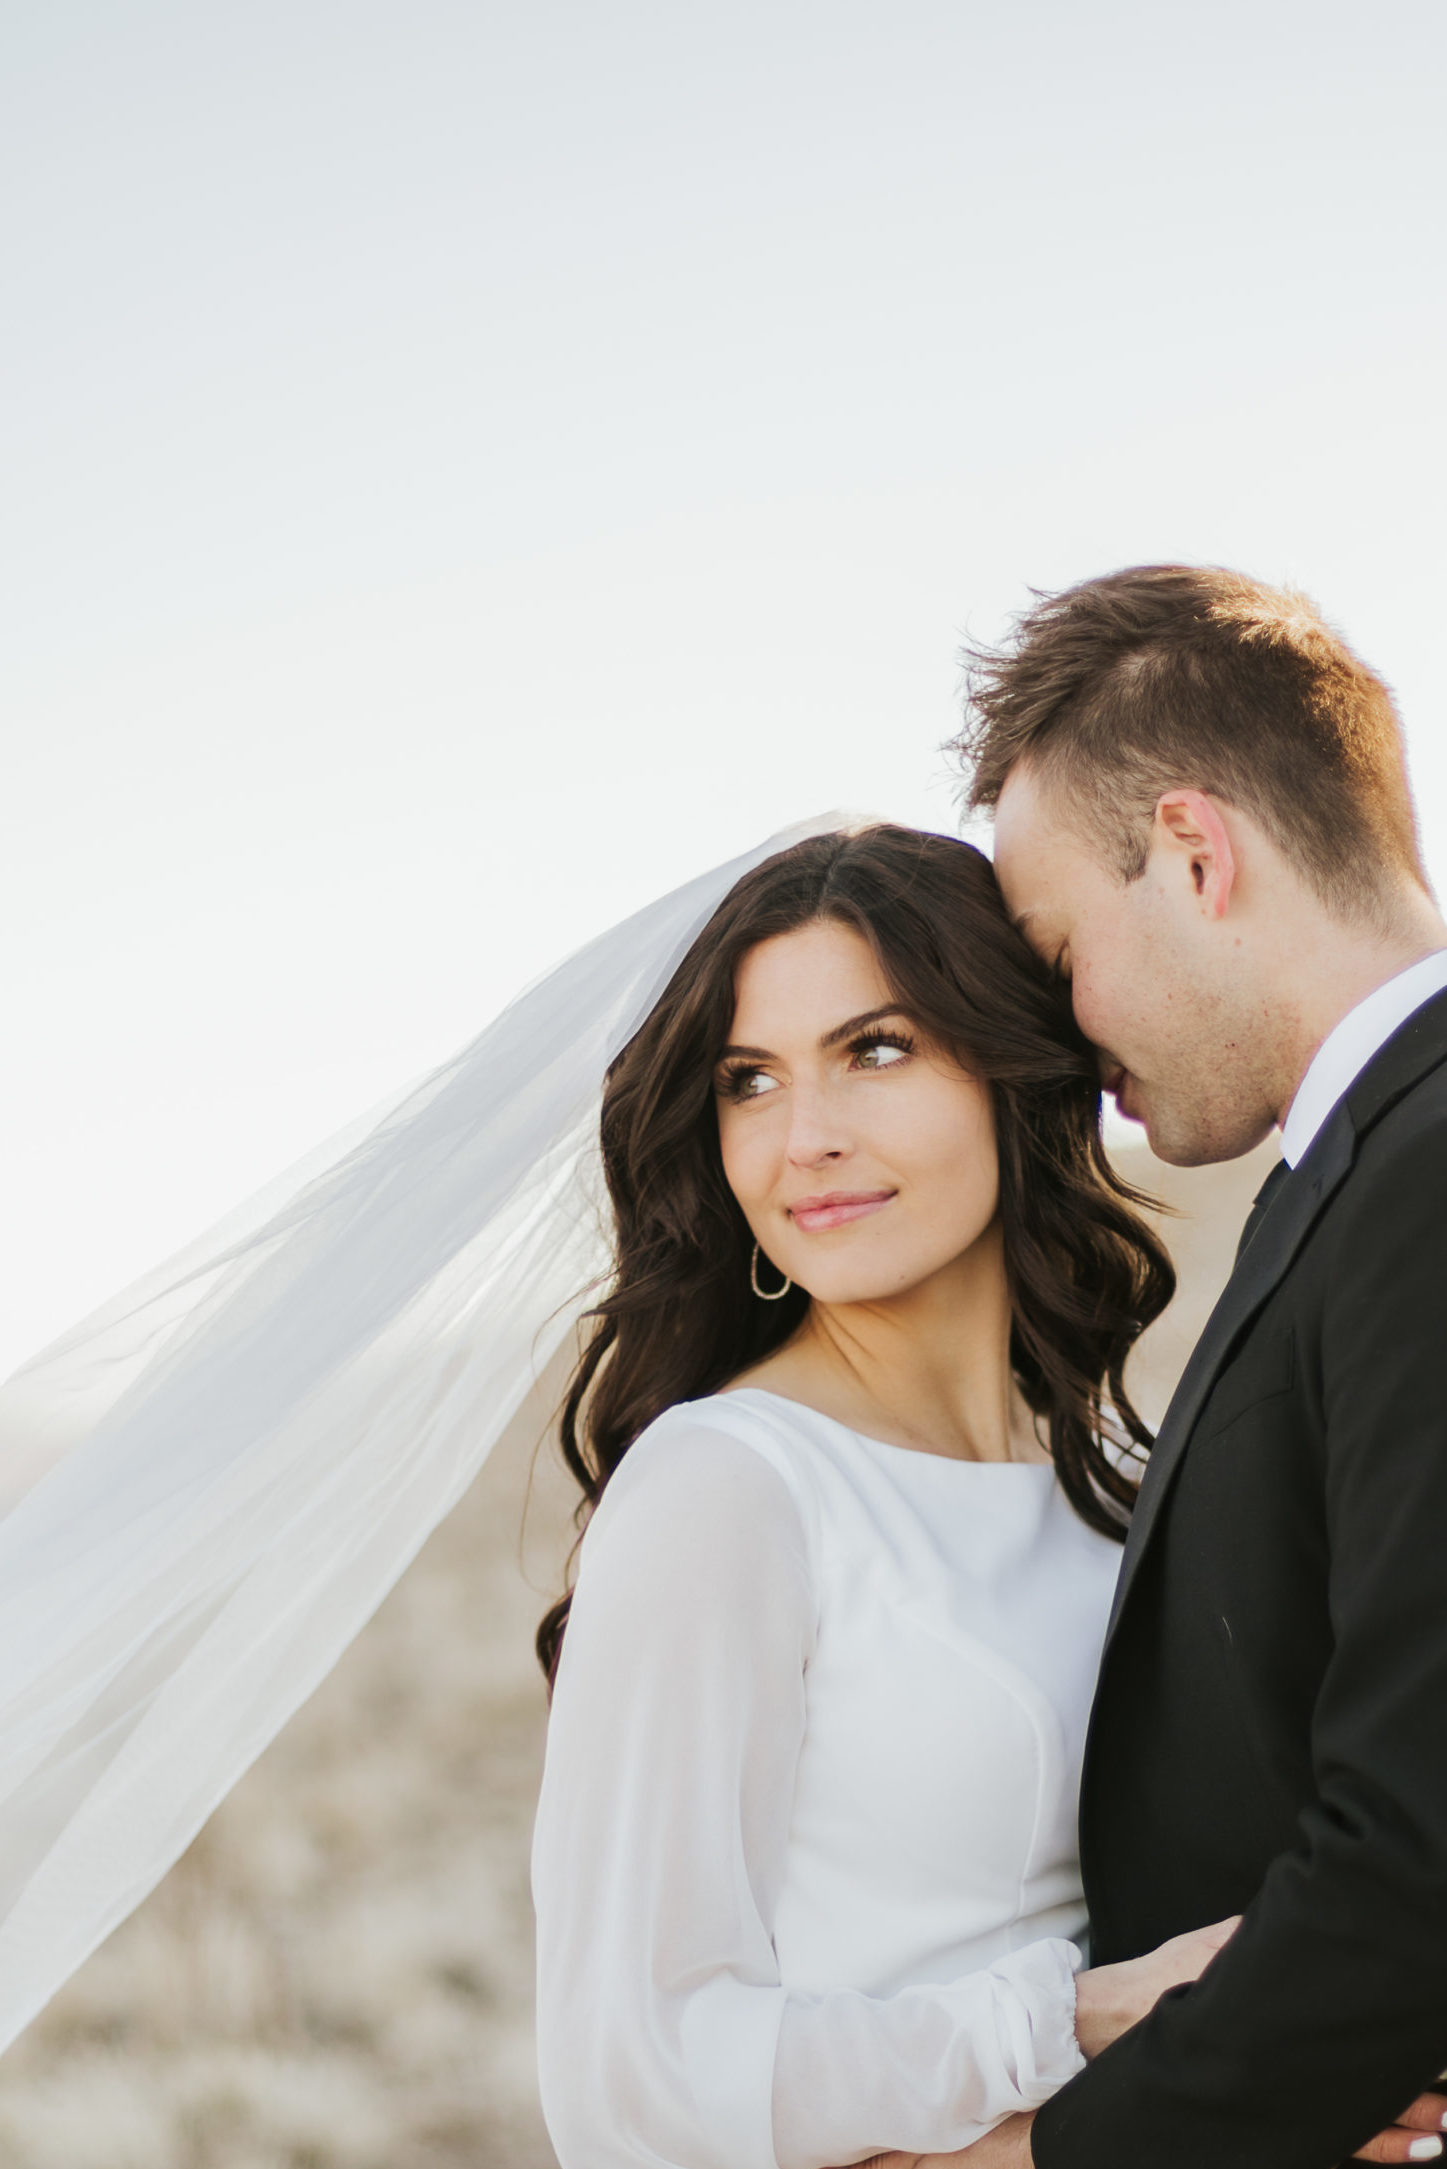 Bride looks off into the distance as couple share an embrace, captured by Robin Kunzler Photo